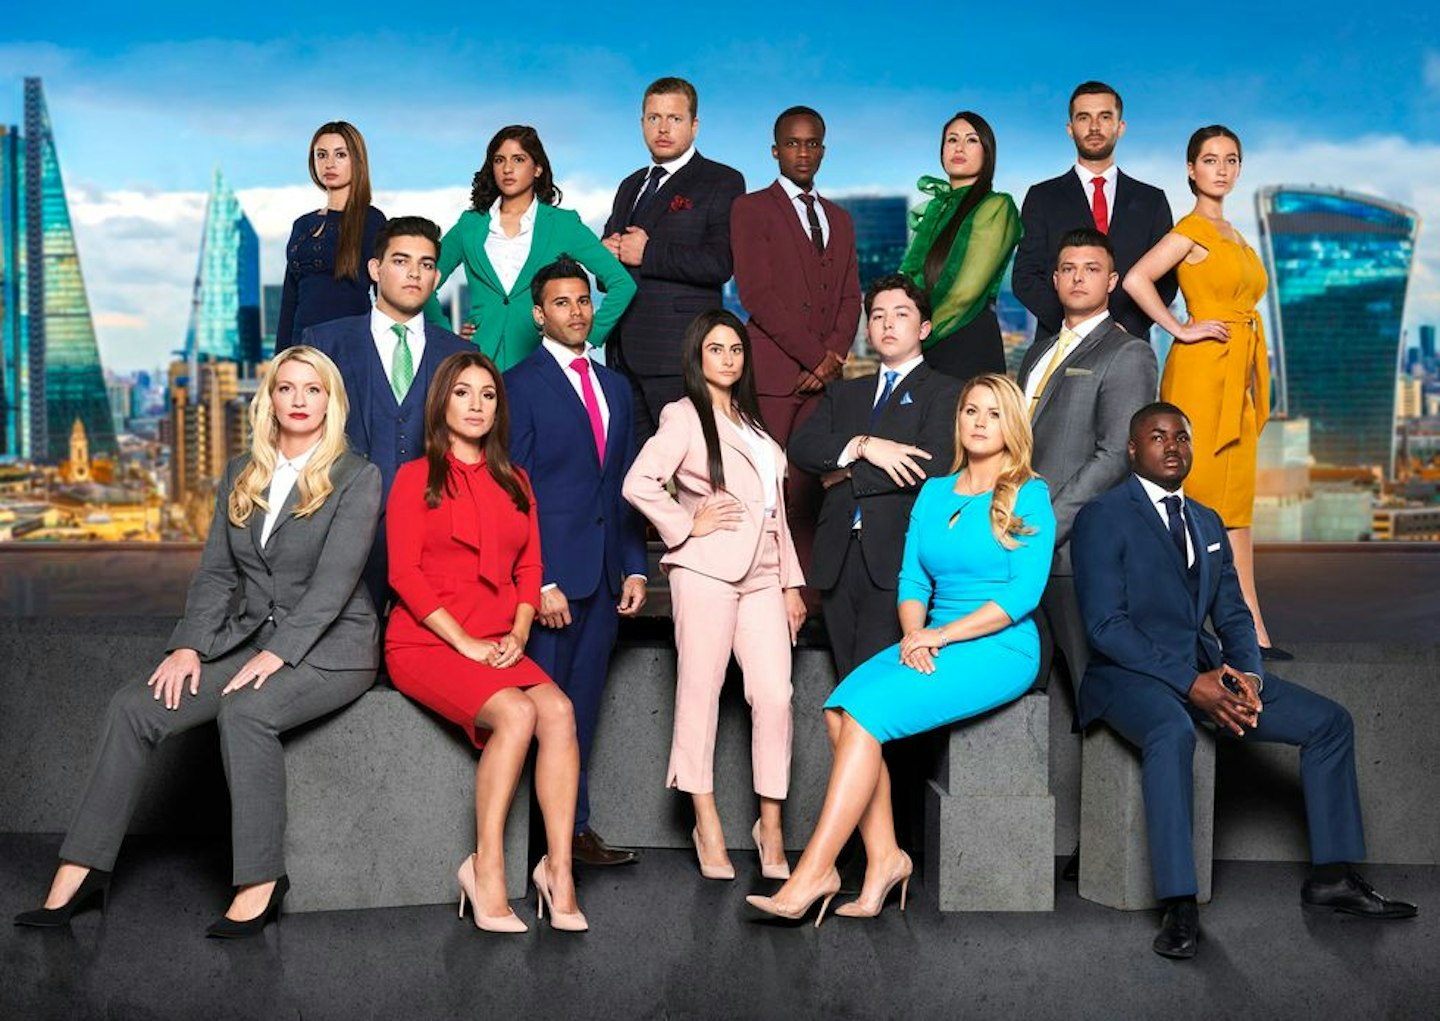 The Apprentice contestants have been revealed